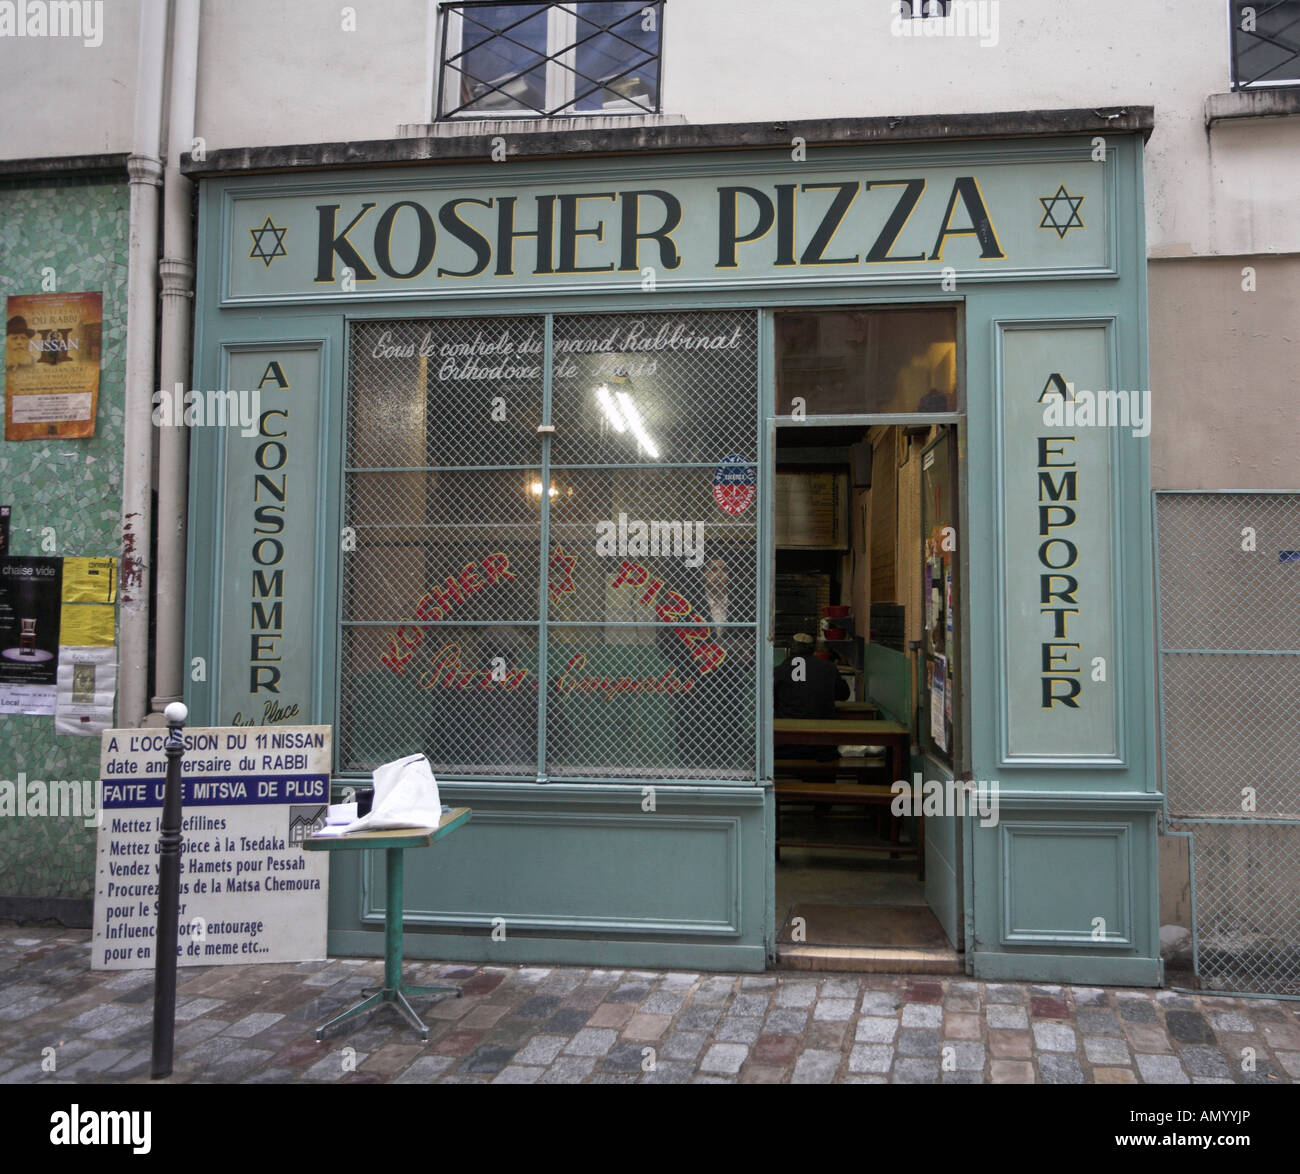 Kosher Pizza in the Marais, the Jewish quarter of Paris France. Wire mesh window grills protect the glass from vandalism Stock Photo